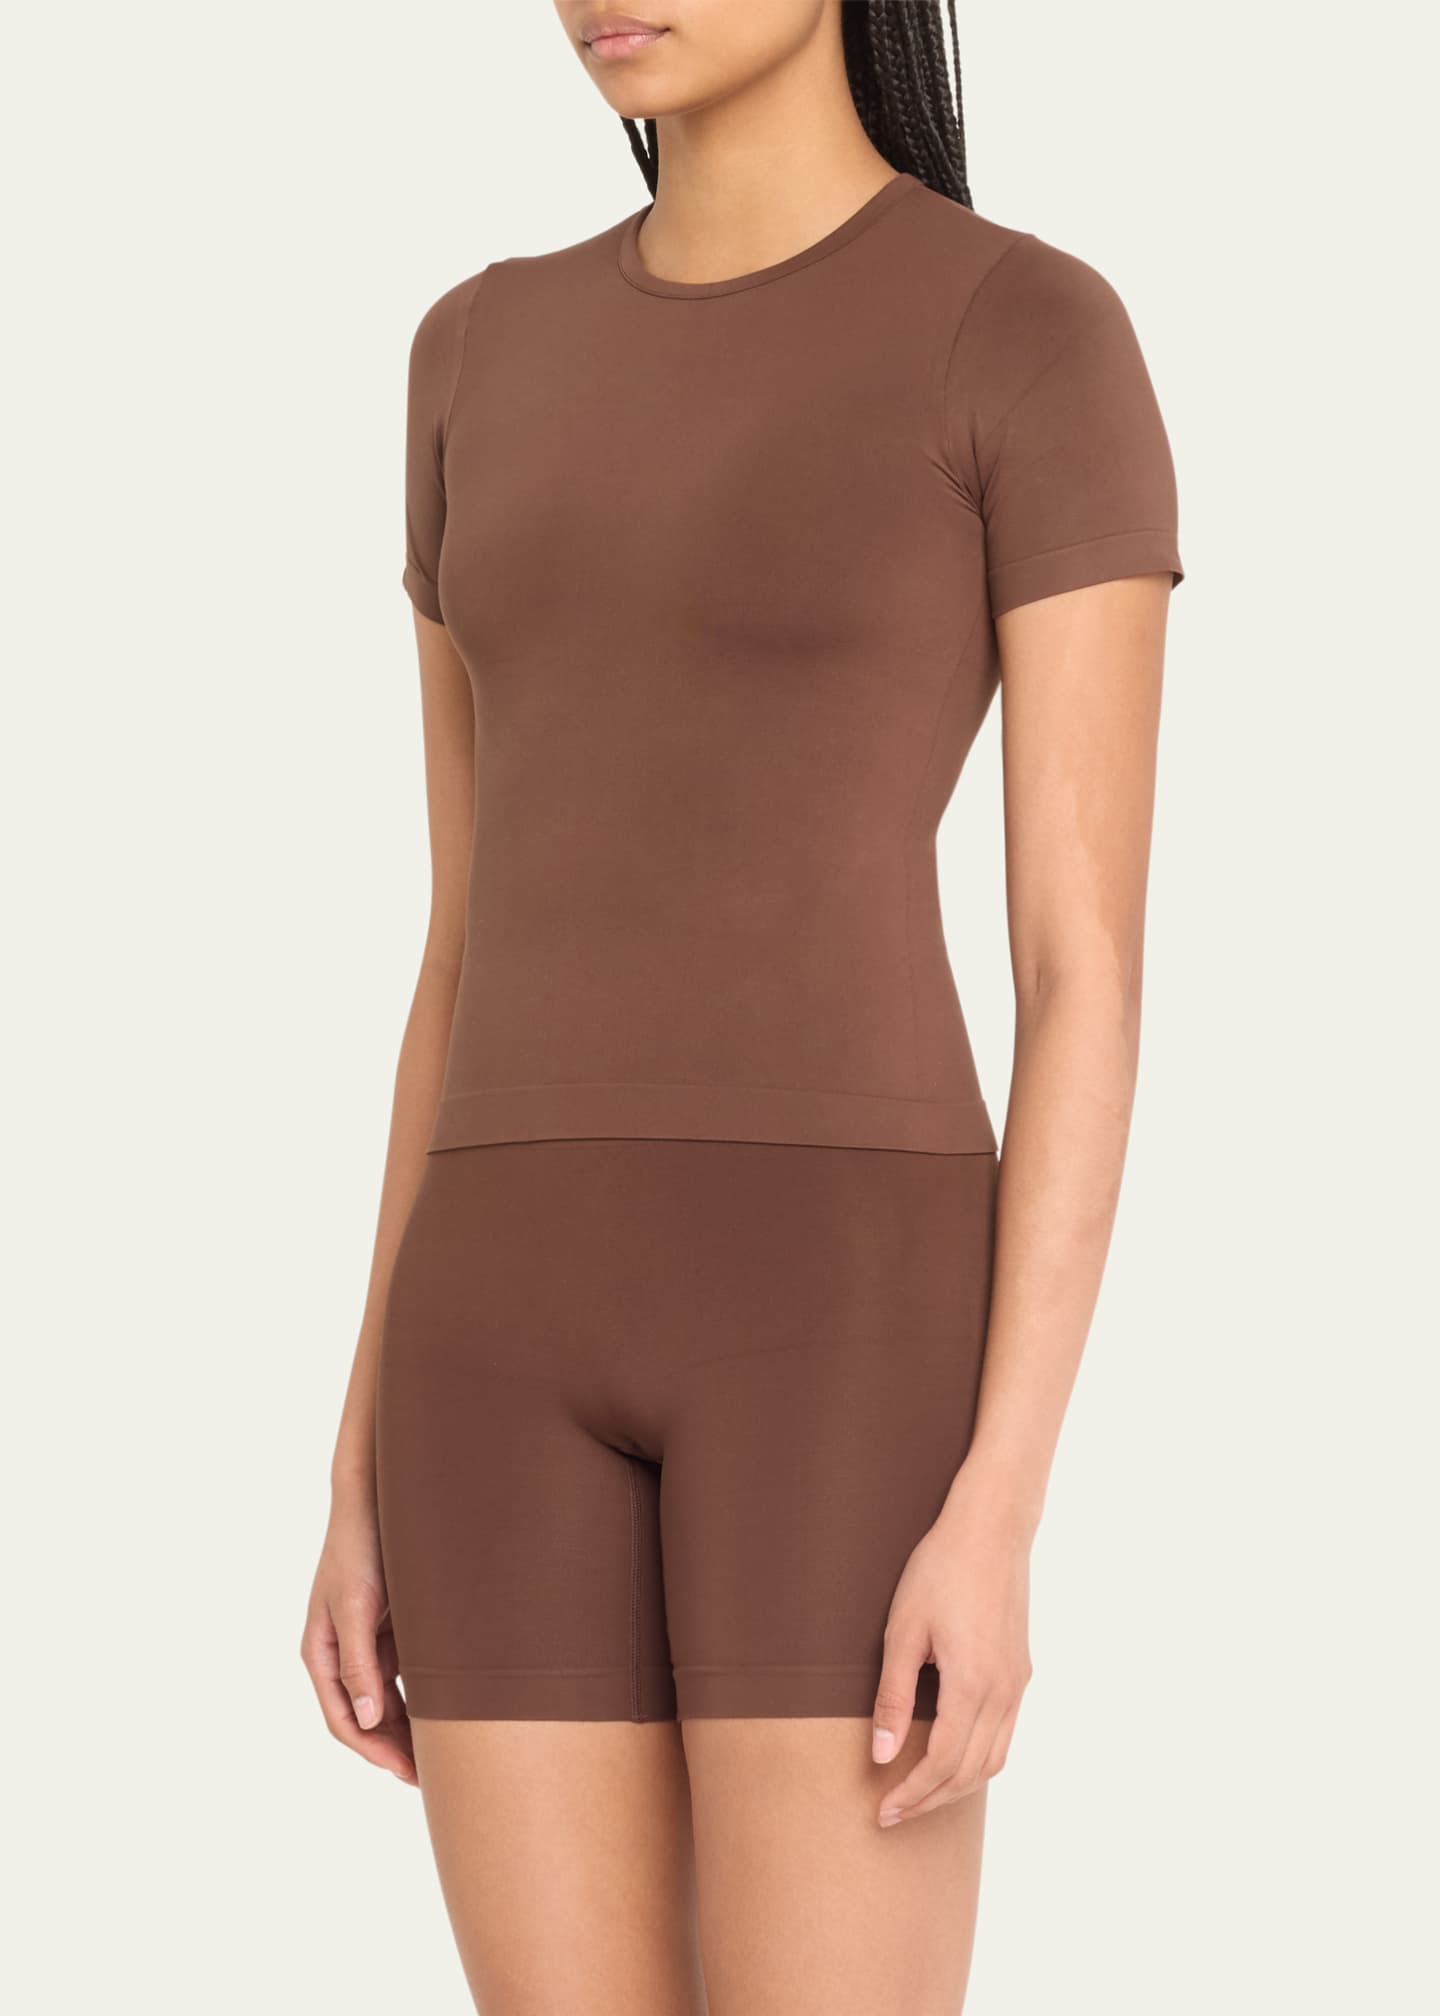 SOFT SMOOTHING SEAMLESS T-SHIRT | COCOA